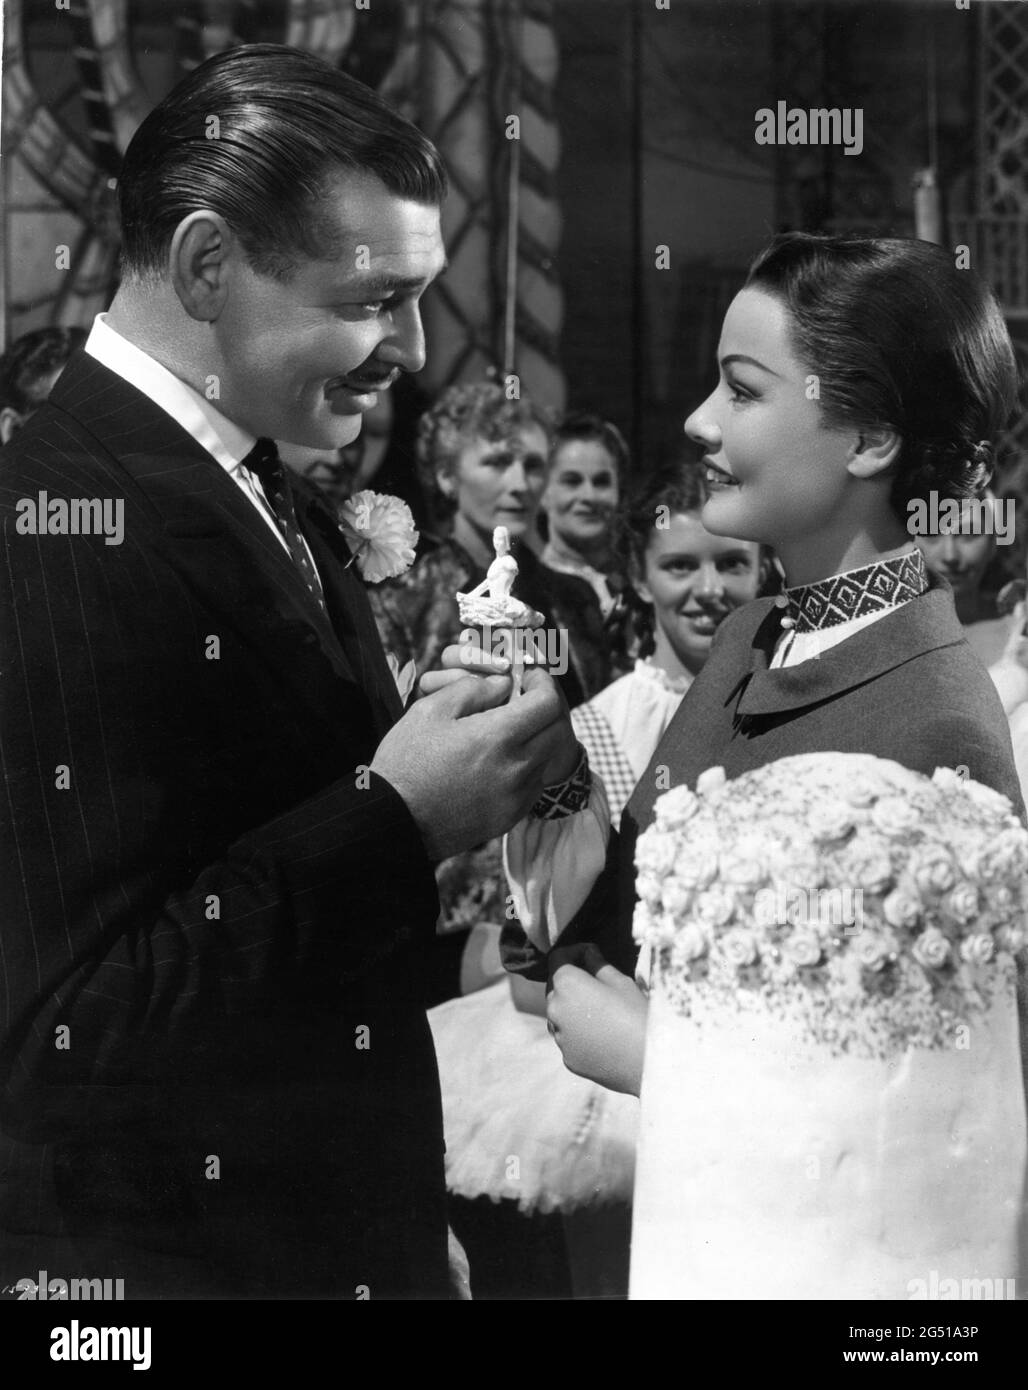 CLARK GABLE and GENE TIERNEY in NEVER LET ME GO 1953 director DELMER DAVES from novel Come The Dawn by Paul Winterton producer Clarence Brown Metro Goldwyn Mayer Stock Photo